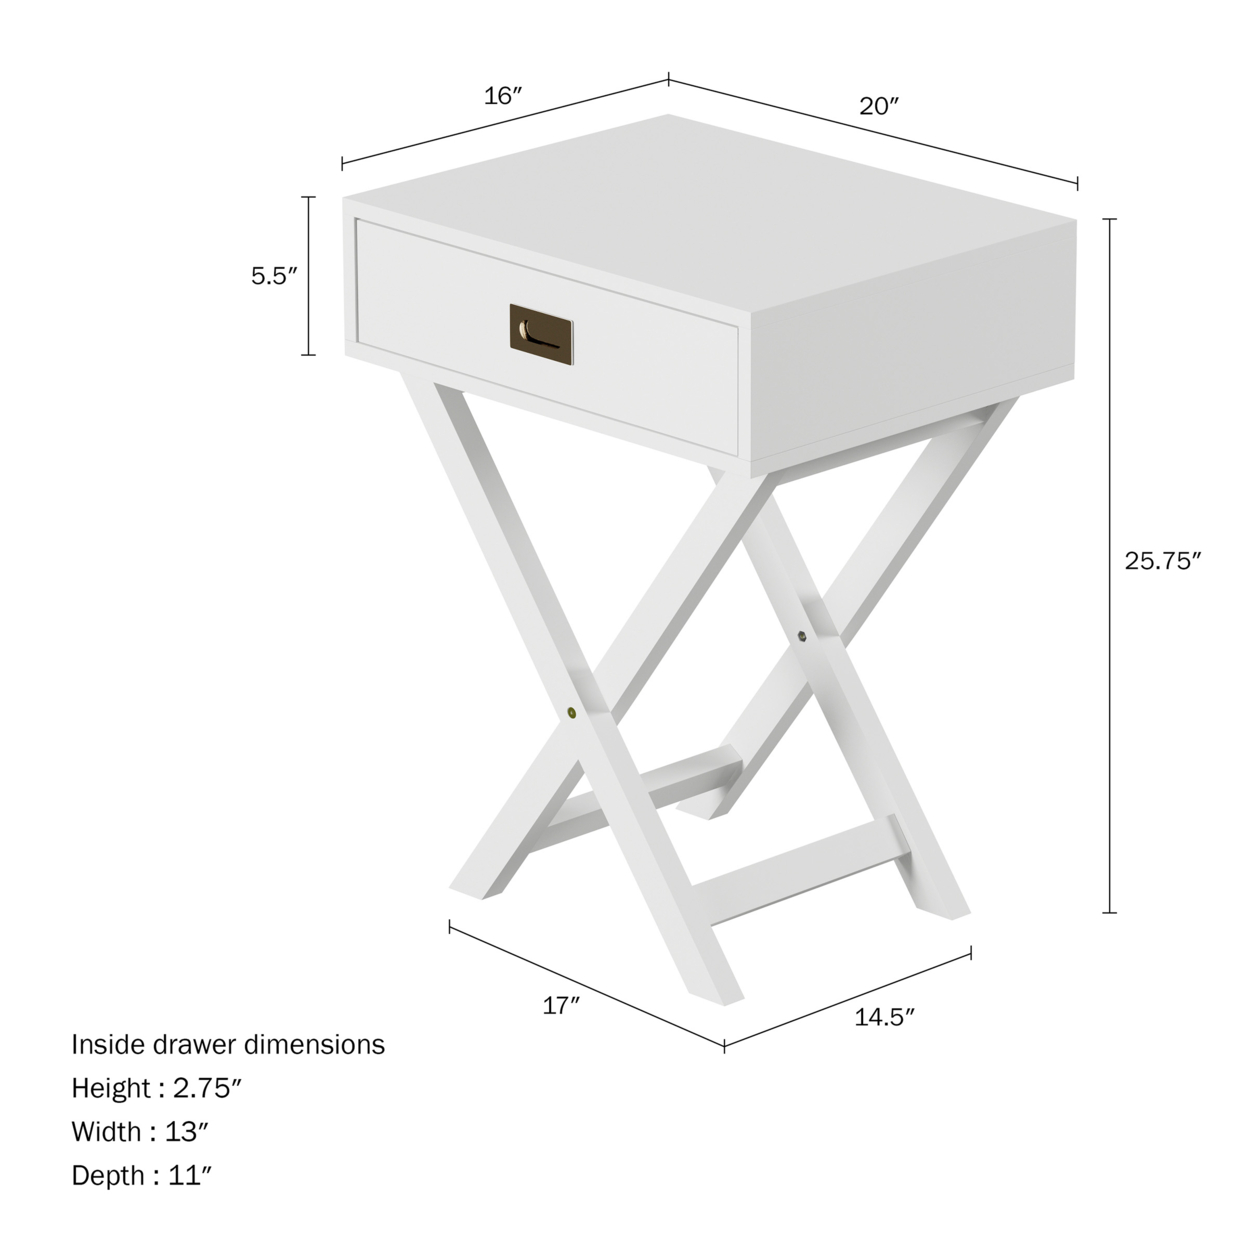 End Table With Drawer- Modern Sofa Side Table With X-Leg DesignWhite Wooden Stand For Living Room Or Bedroom